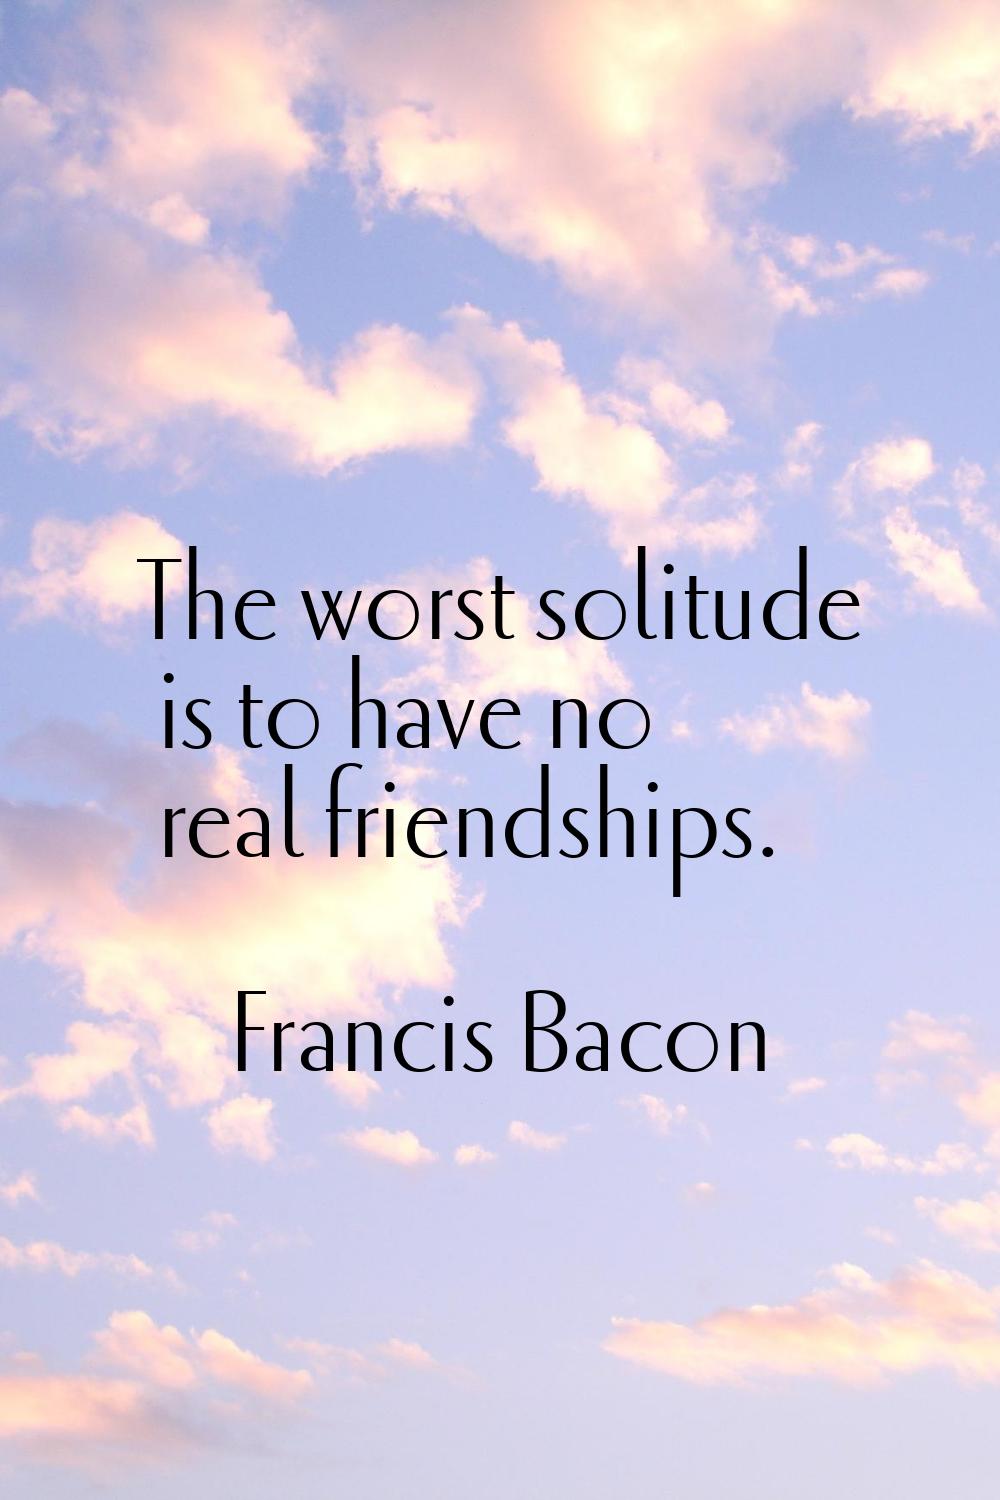 The worst solitude is to have no real friendships.